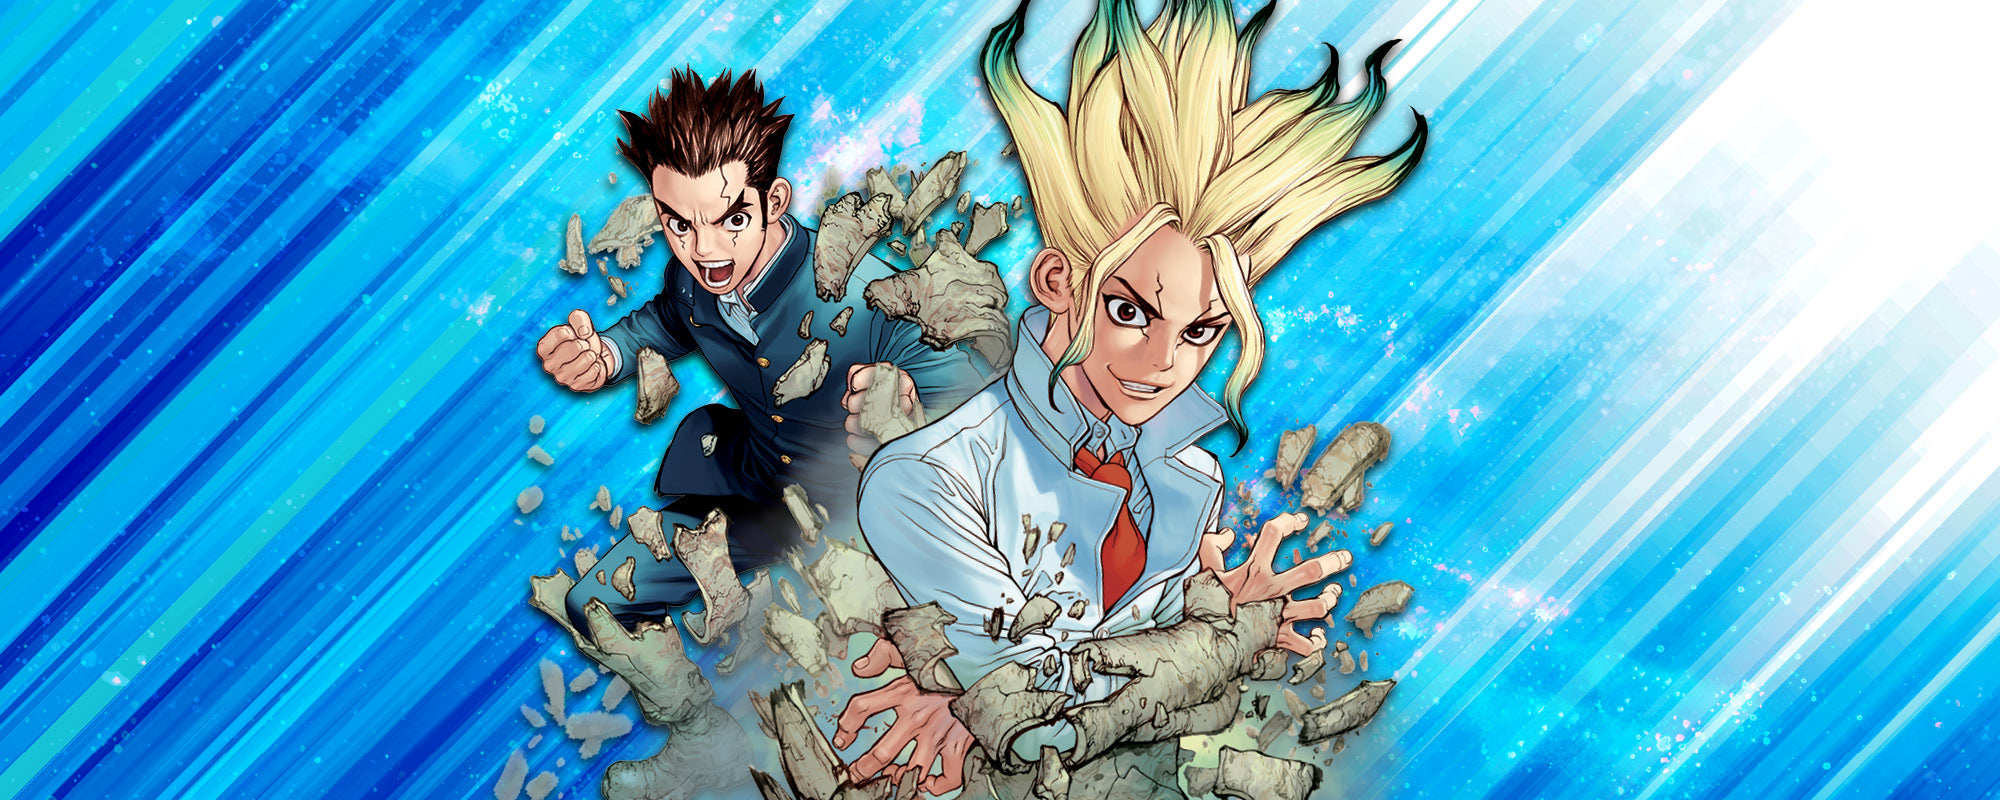 Free Chapters of Dr. Stone Manga Available from Viz!